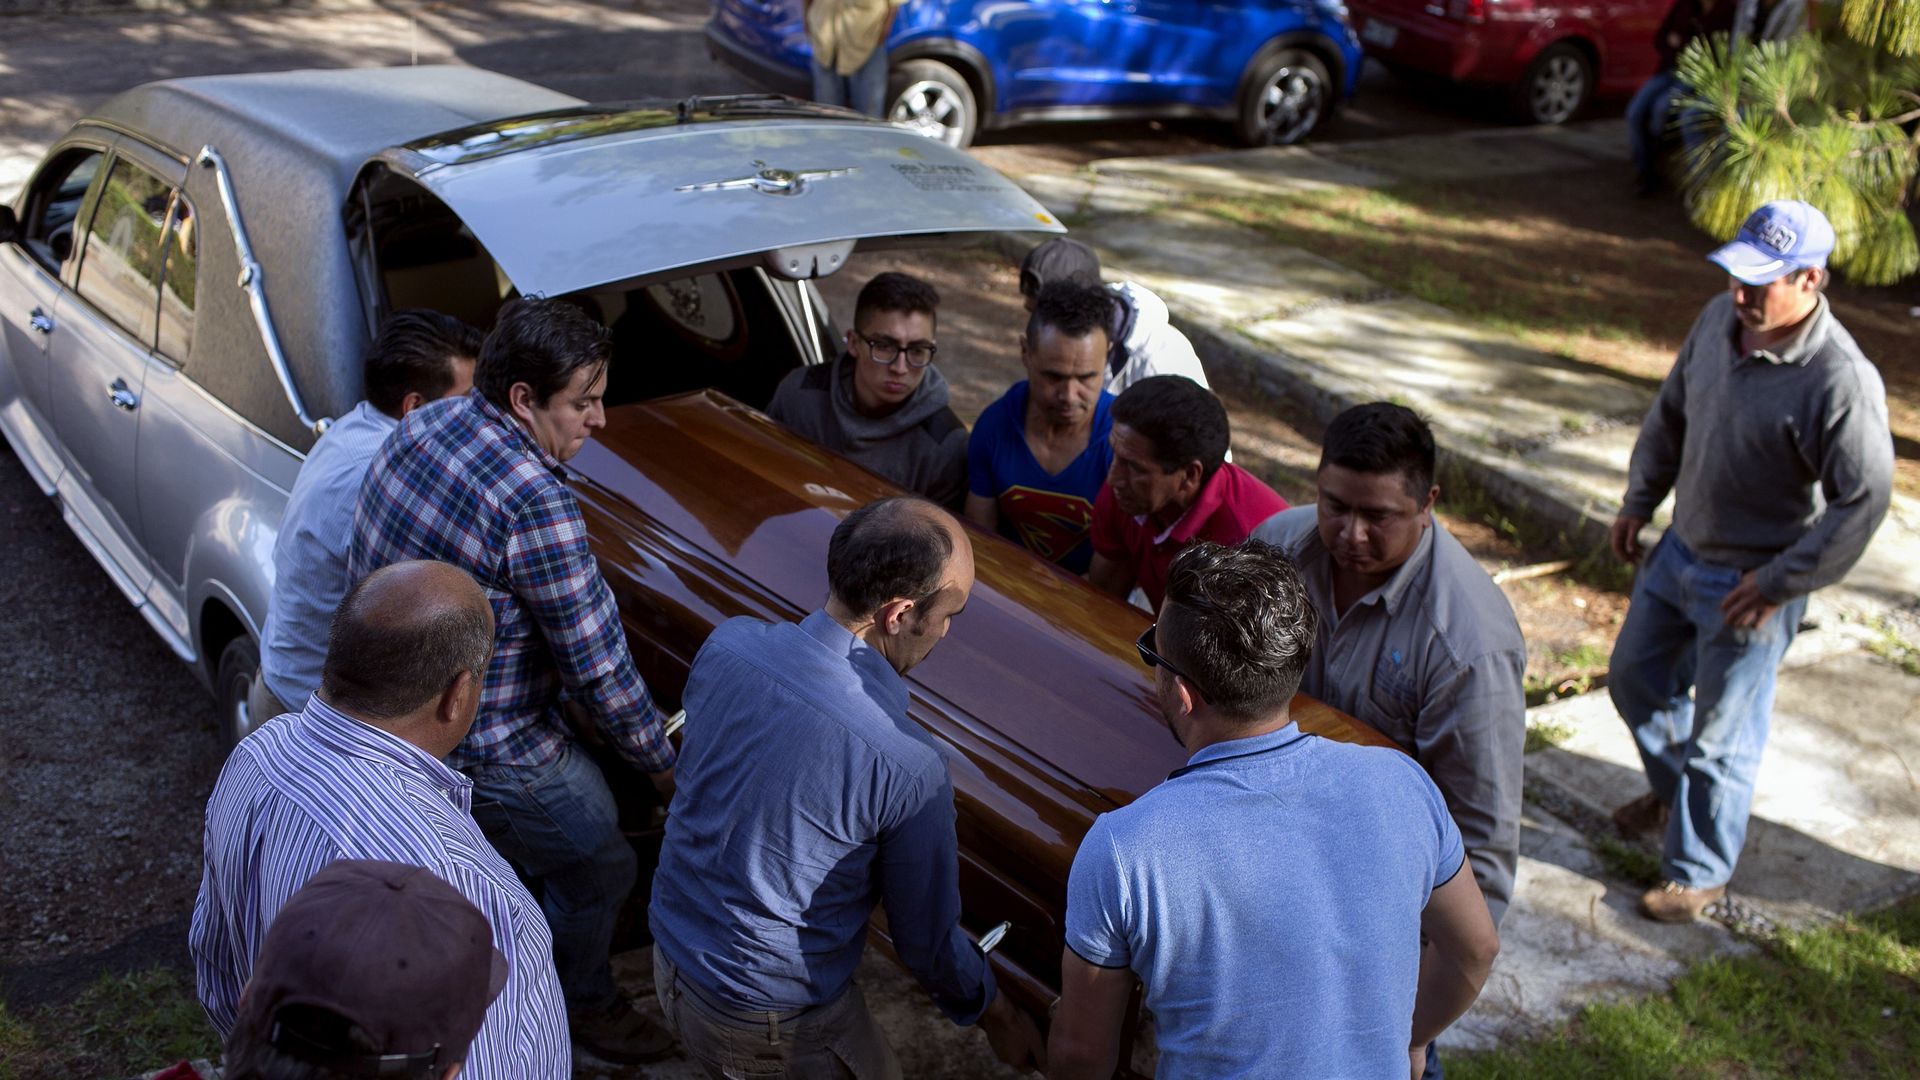 Coffin is pulled out of car trunk by group of people